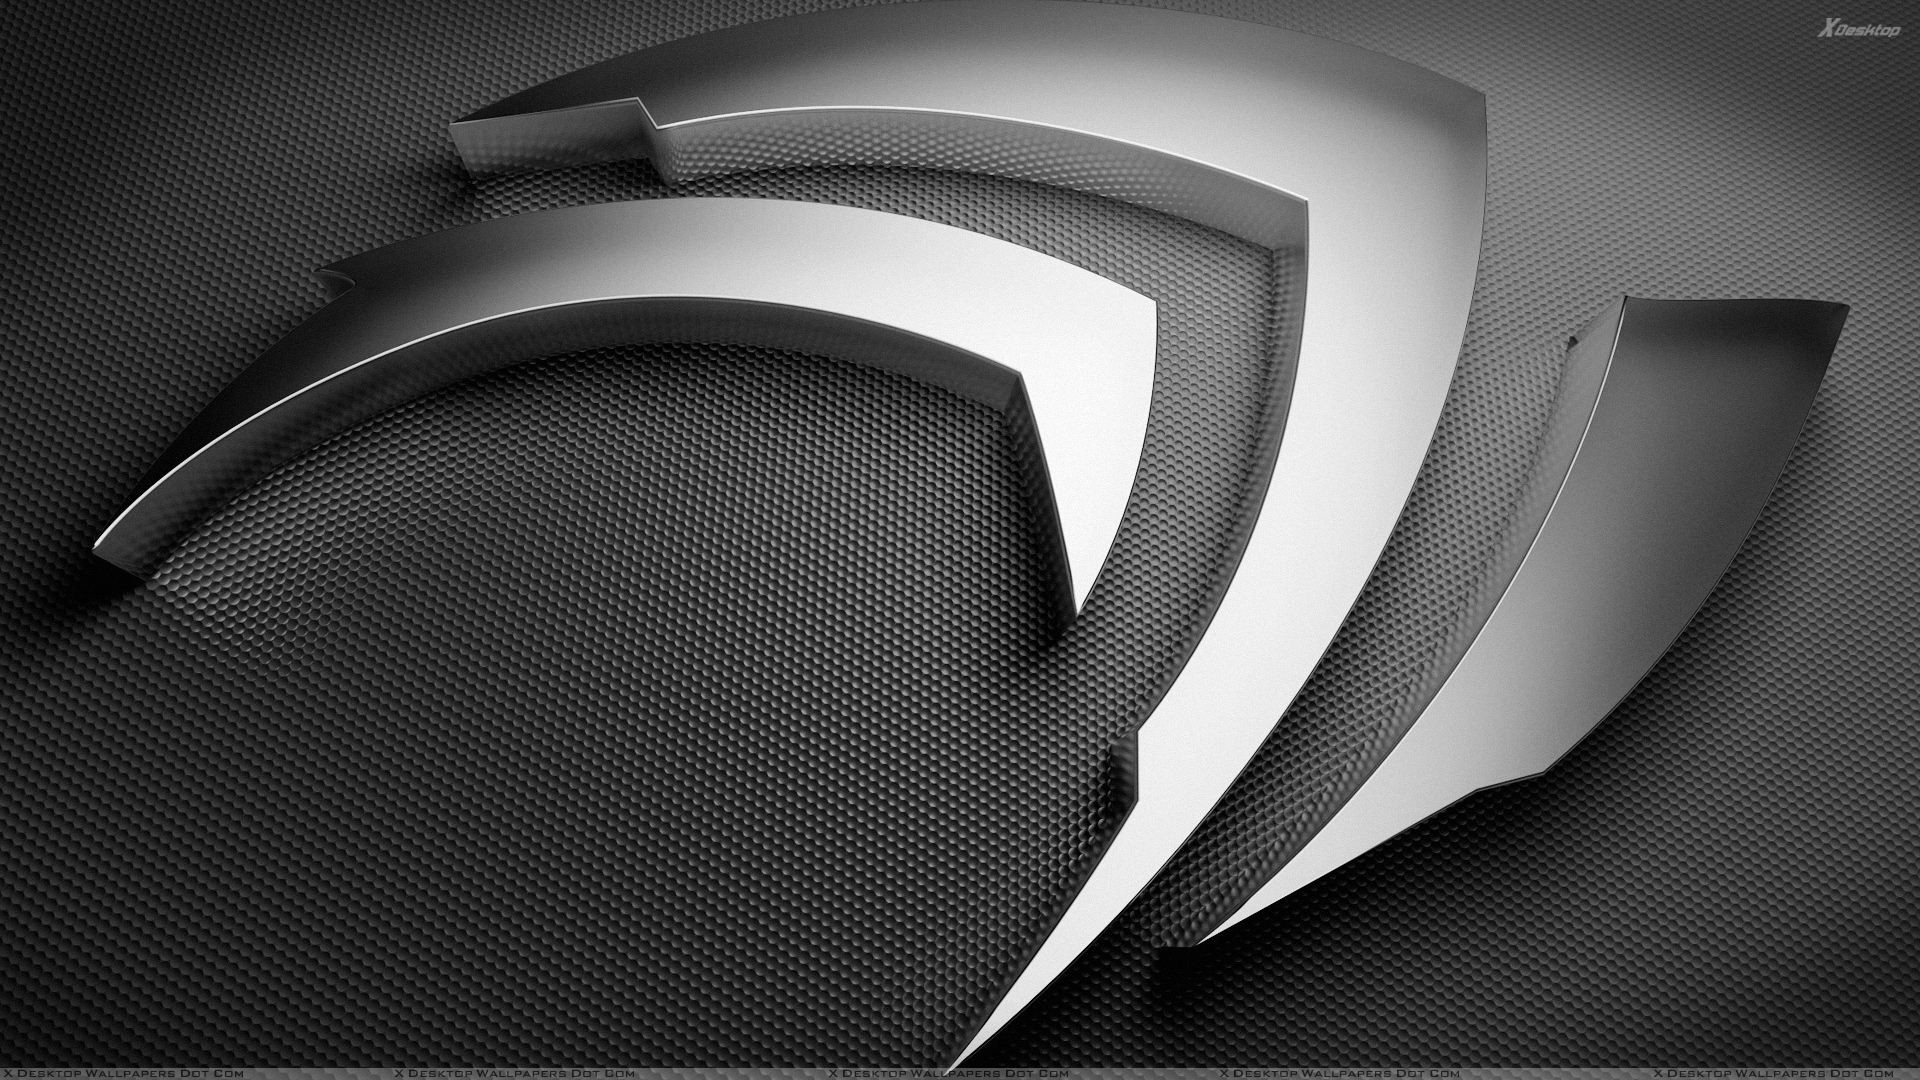 1920x1080 You are viewing wallpaper titled "Nvidia Black N White 3d" ...